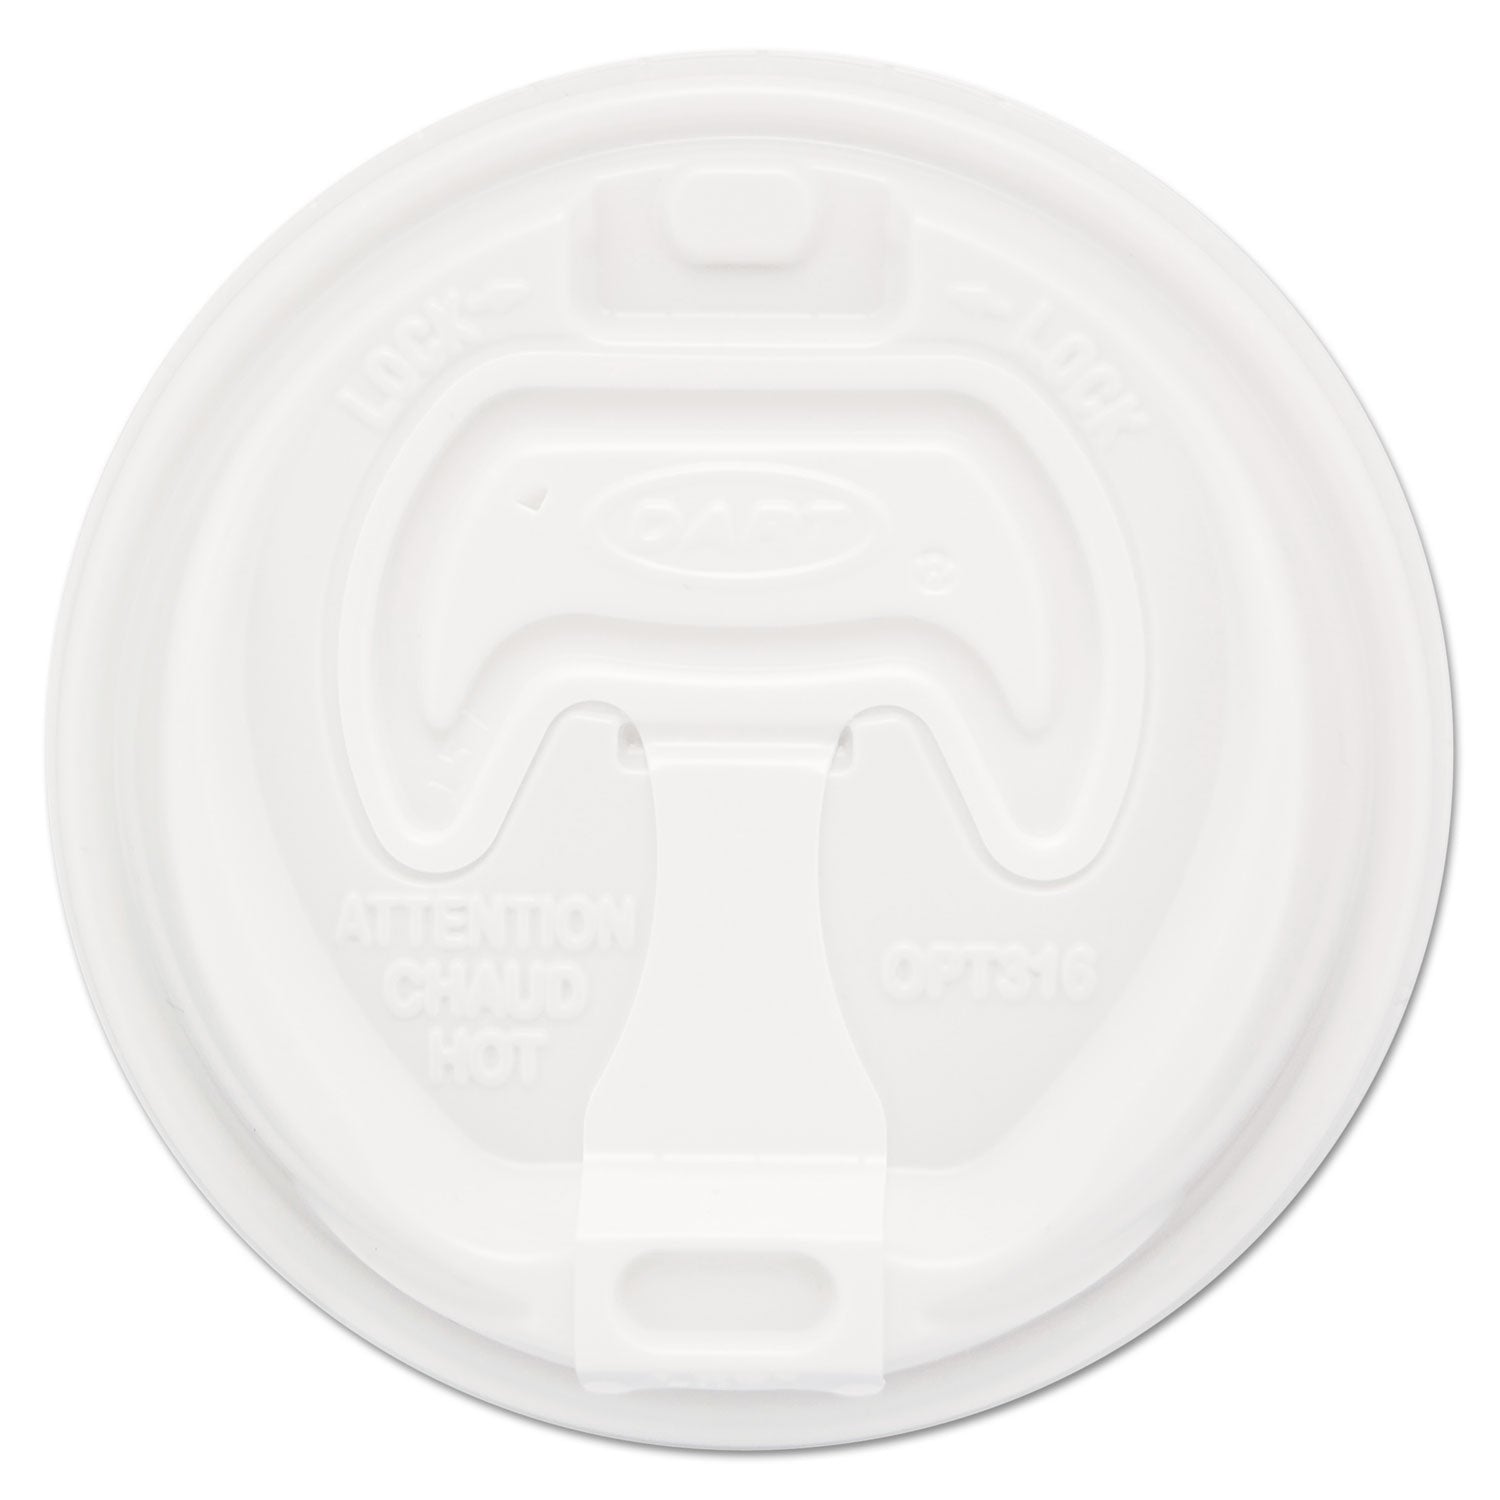 Optima Reclosable Lid, Fits 12 oz to 24 oz Foam Cups, White, 100 Pack, 10 Packs/Carton - 